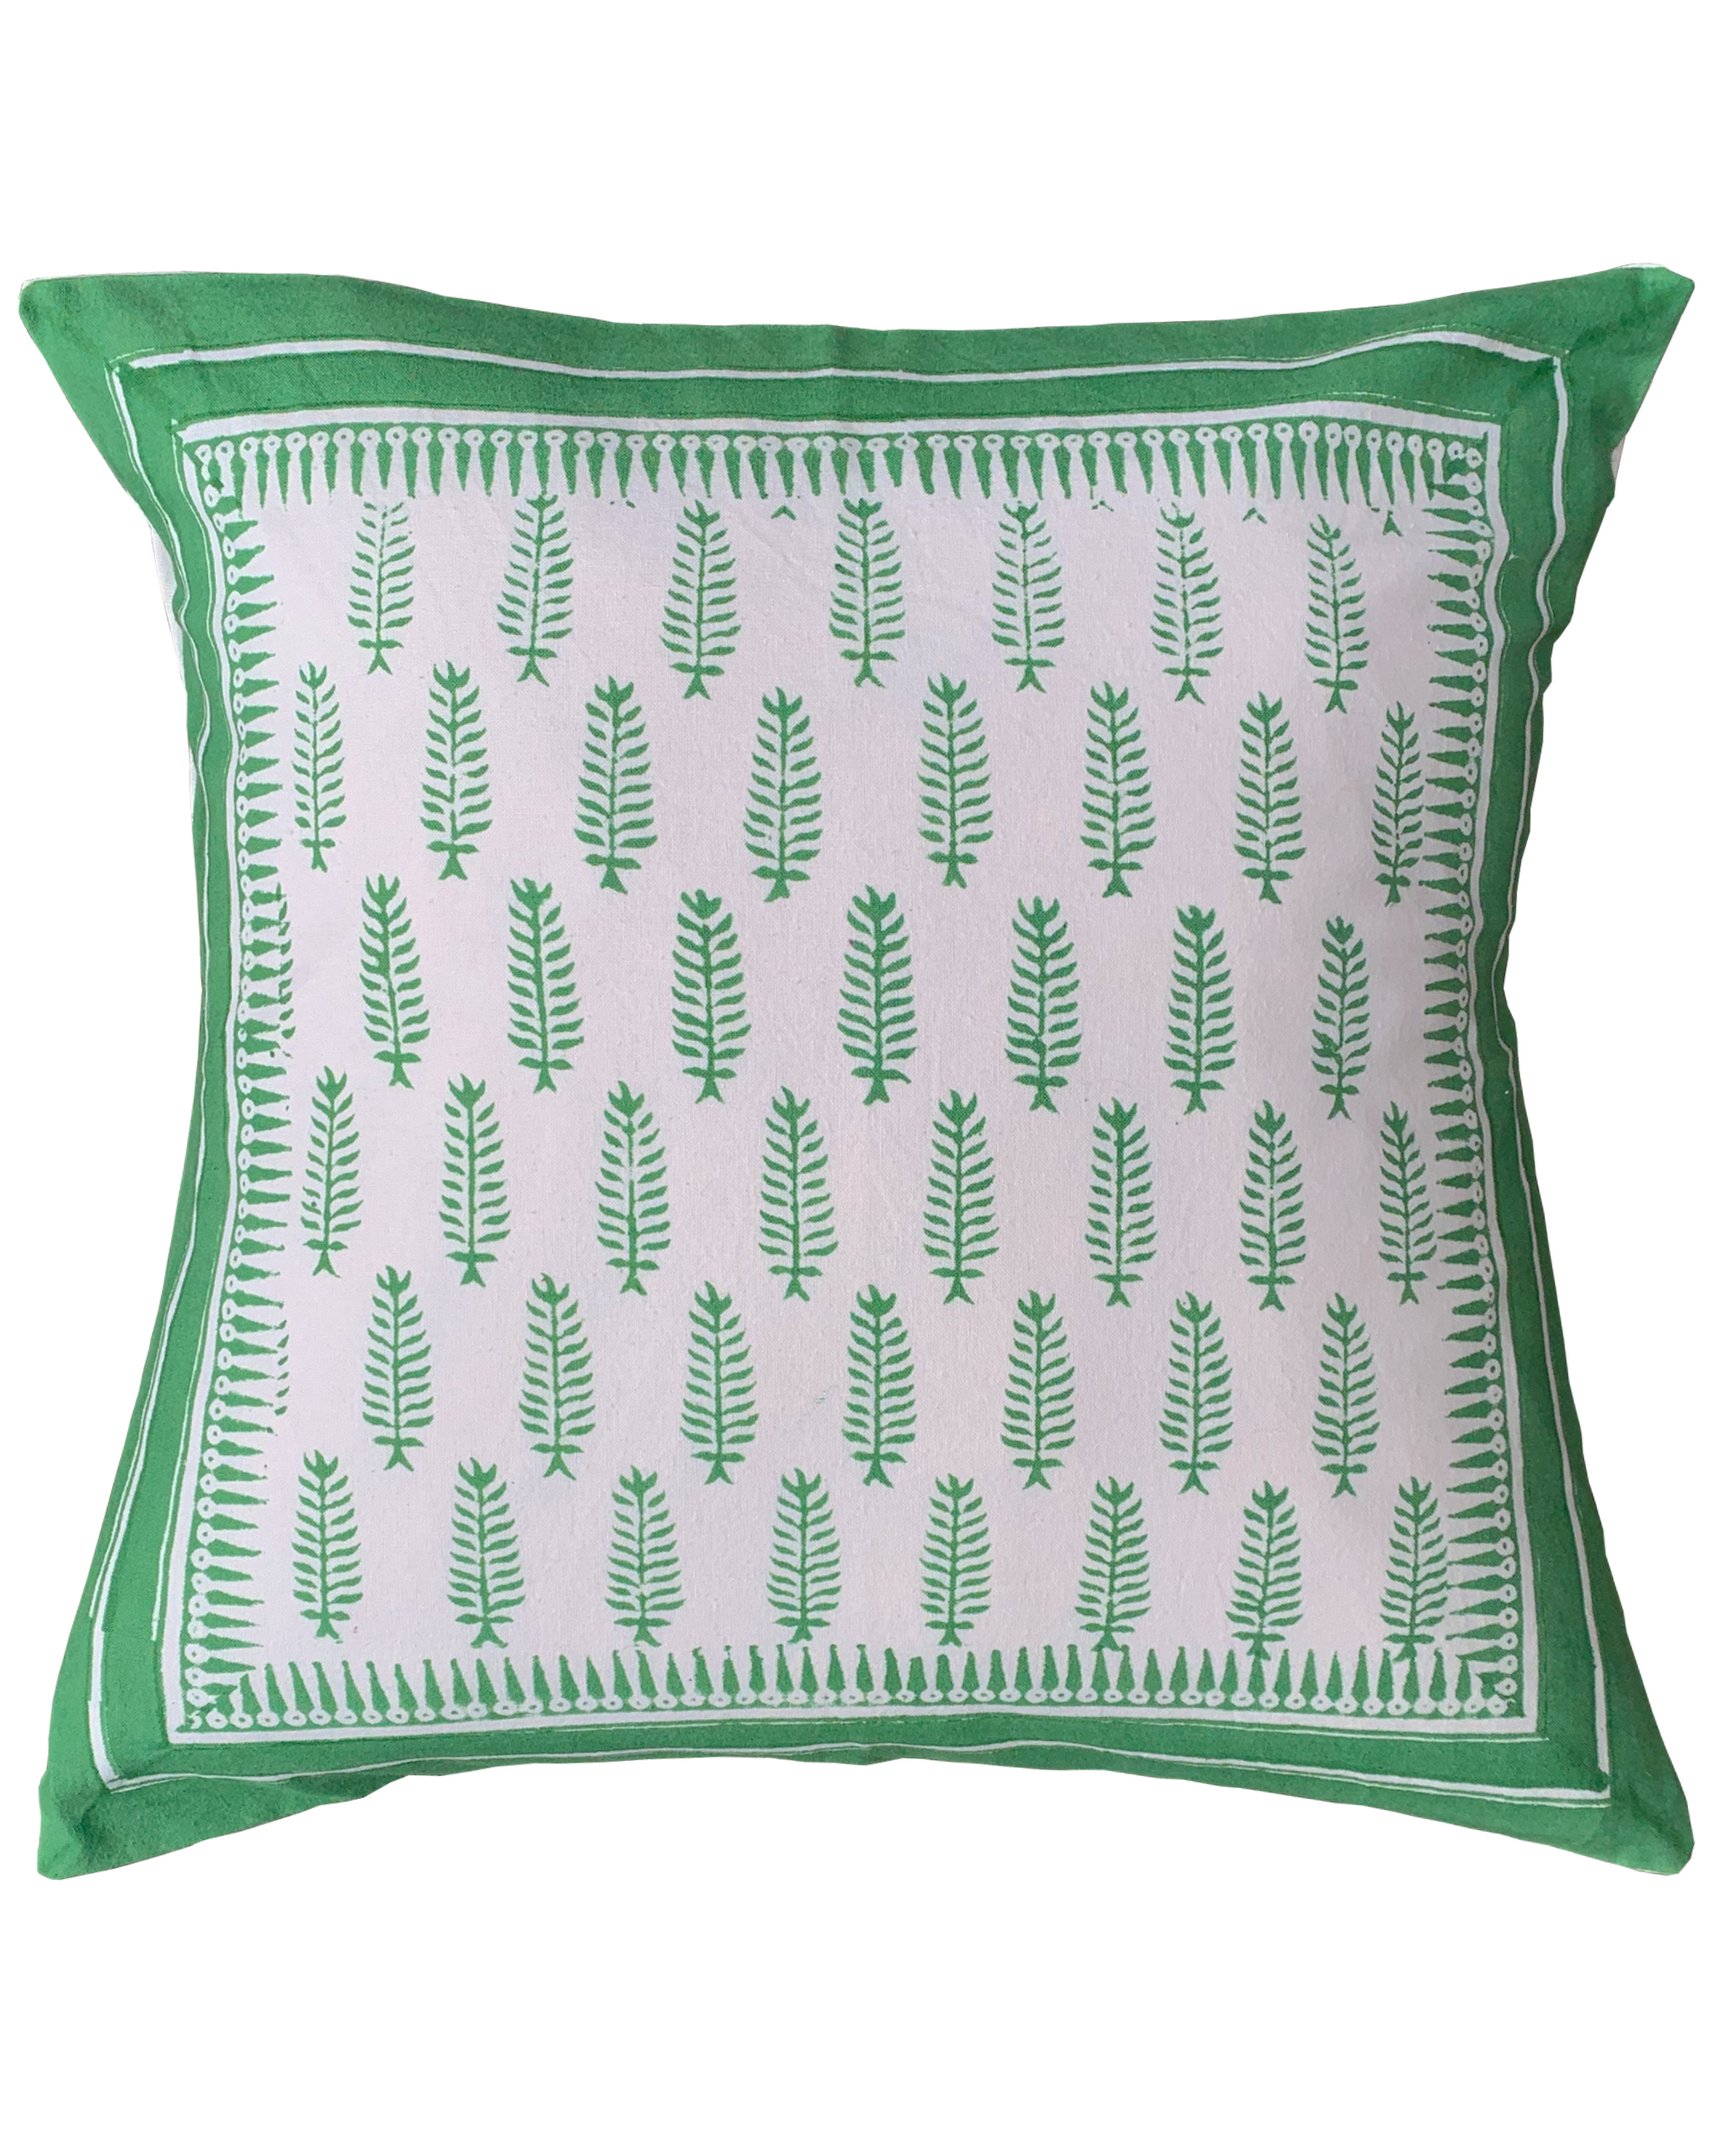 greenferncushioncover